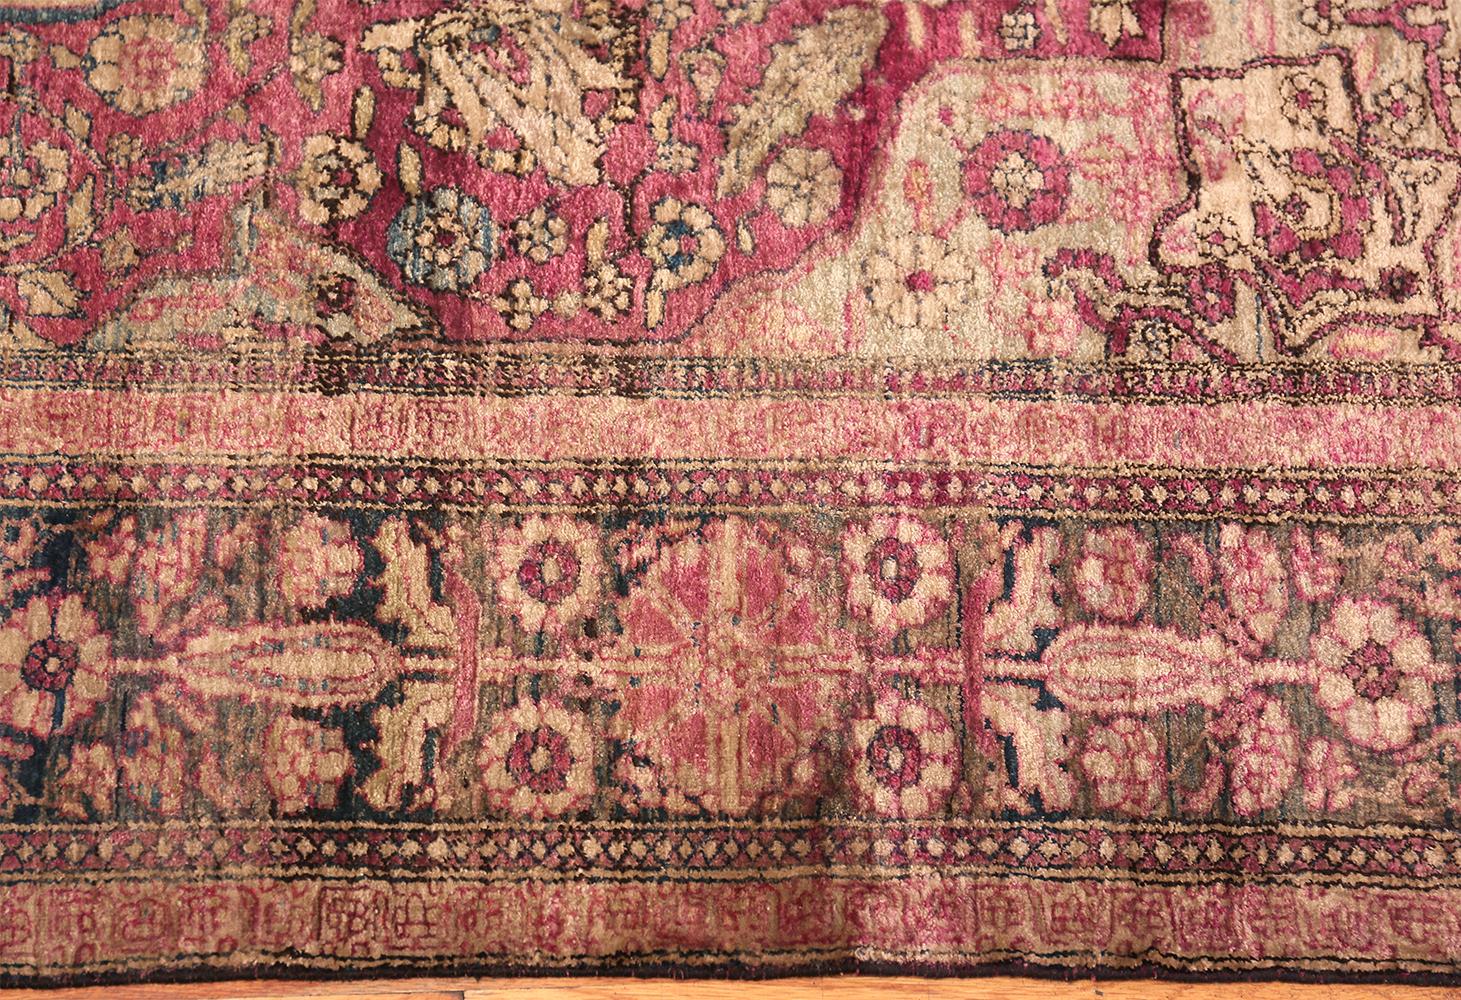 Magnificent small silk Kashan Mohtashem antique Persian rug, country of origin / rug type: Persian rug, circa 1900 - Size: 3 ft 7 in x 6 ft 5 in (1.09 m x 1.96 m). Hadji Mollah Mohammed Hassan Mohtashem is one of the most recognizable names in